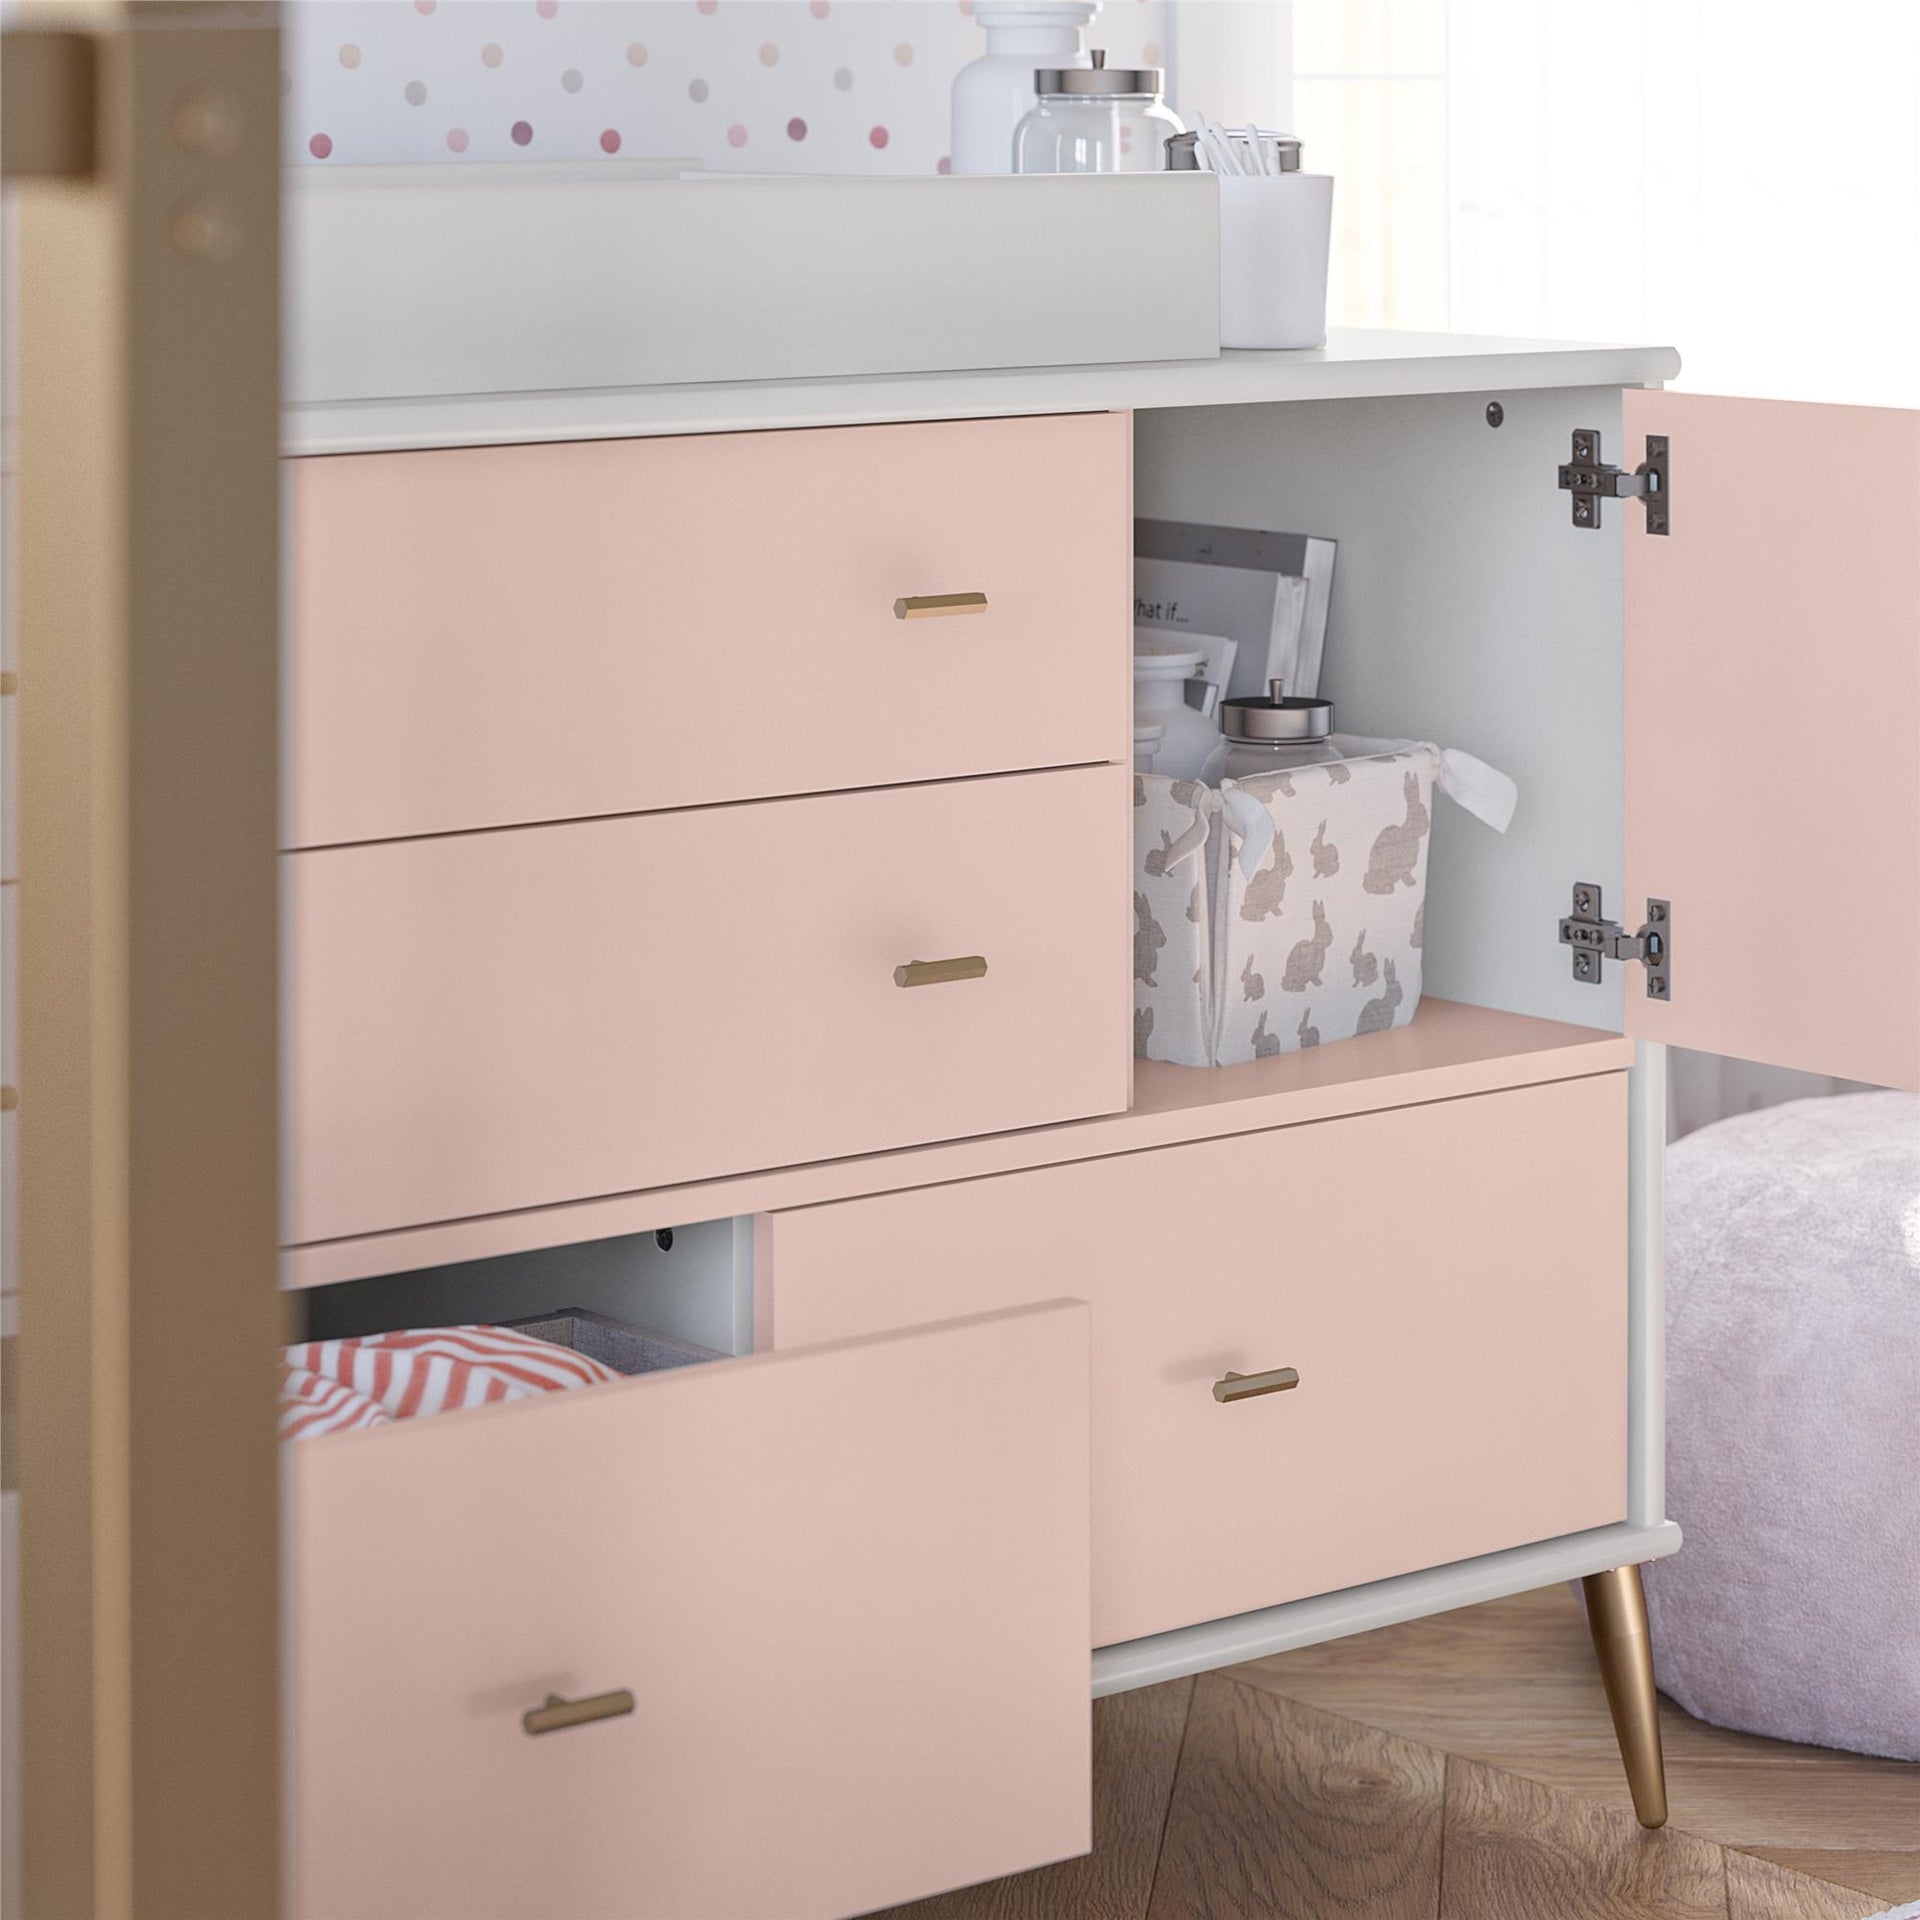 Valentina 4 Drawer/ 1 Door Convertible Dresser & Changing Table, White and Pink - Pale Pink